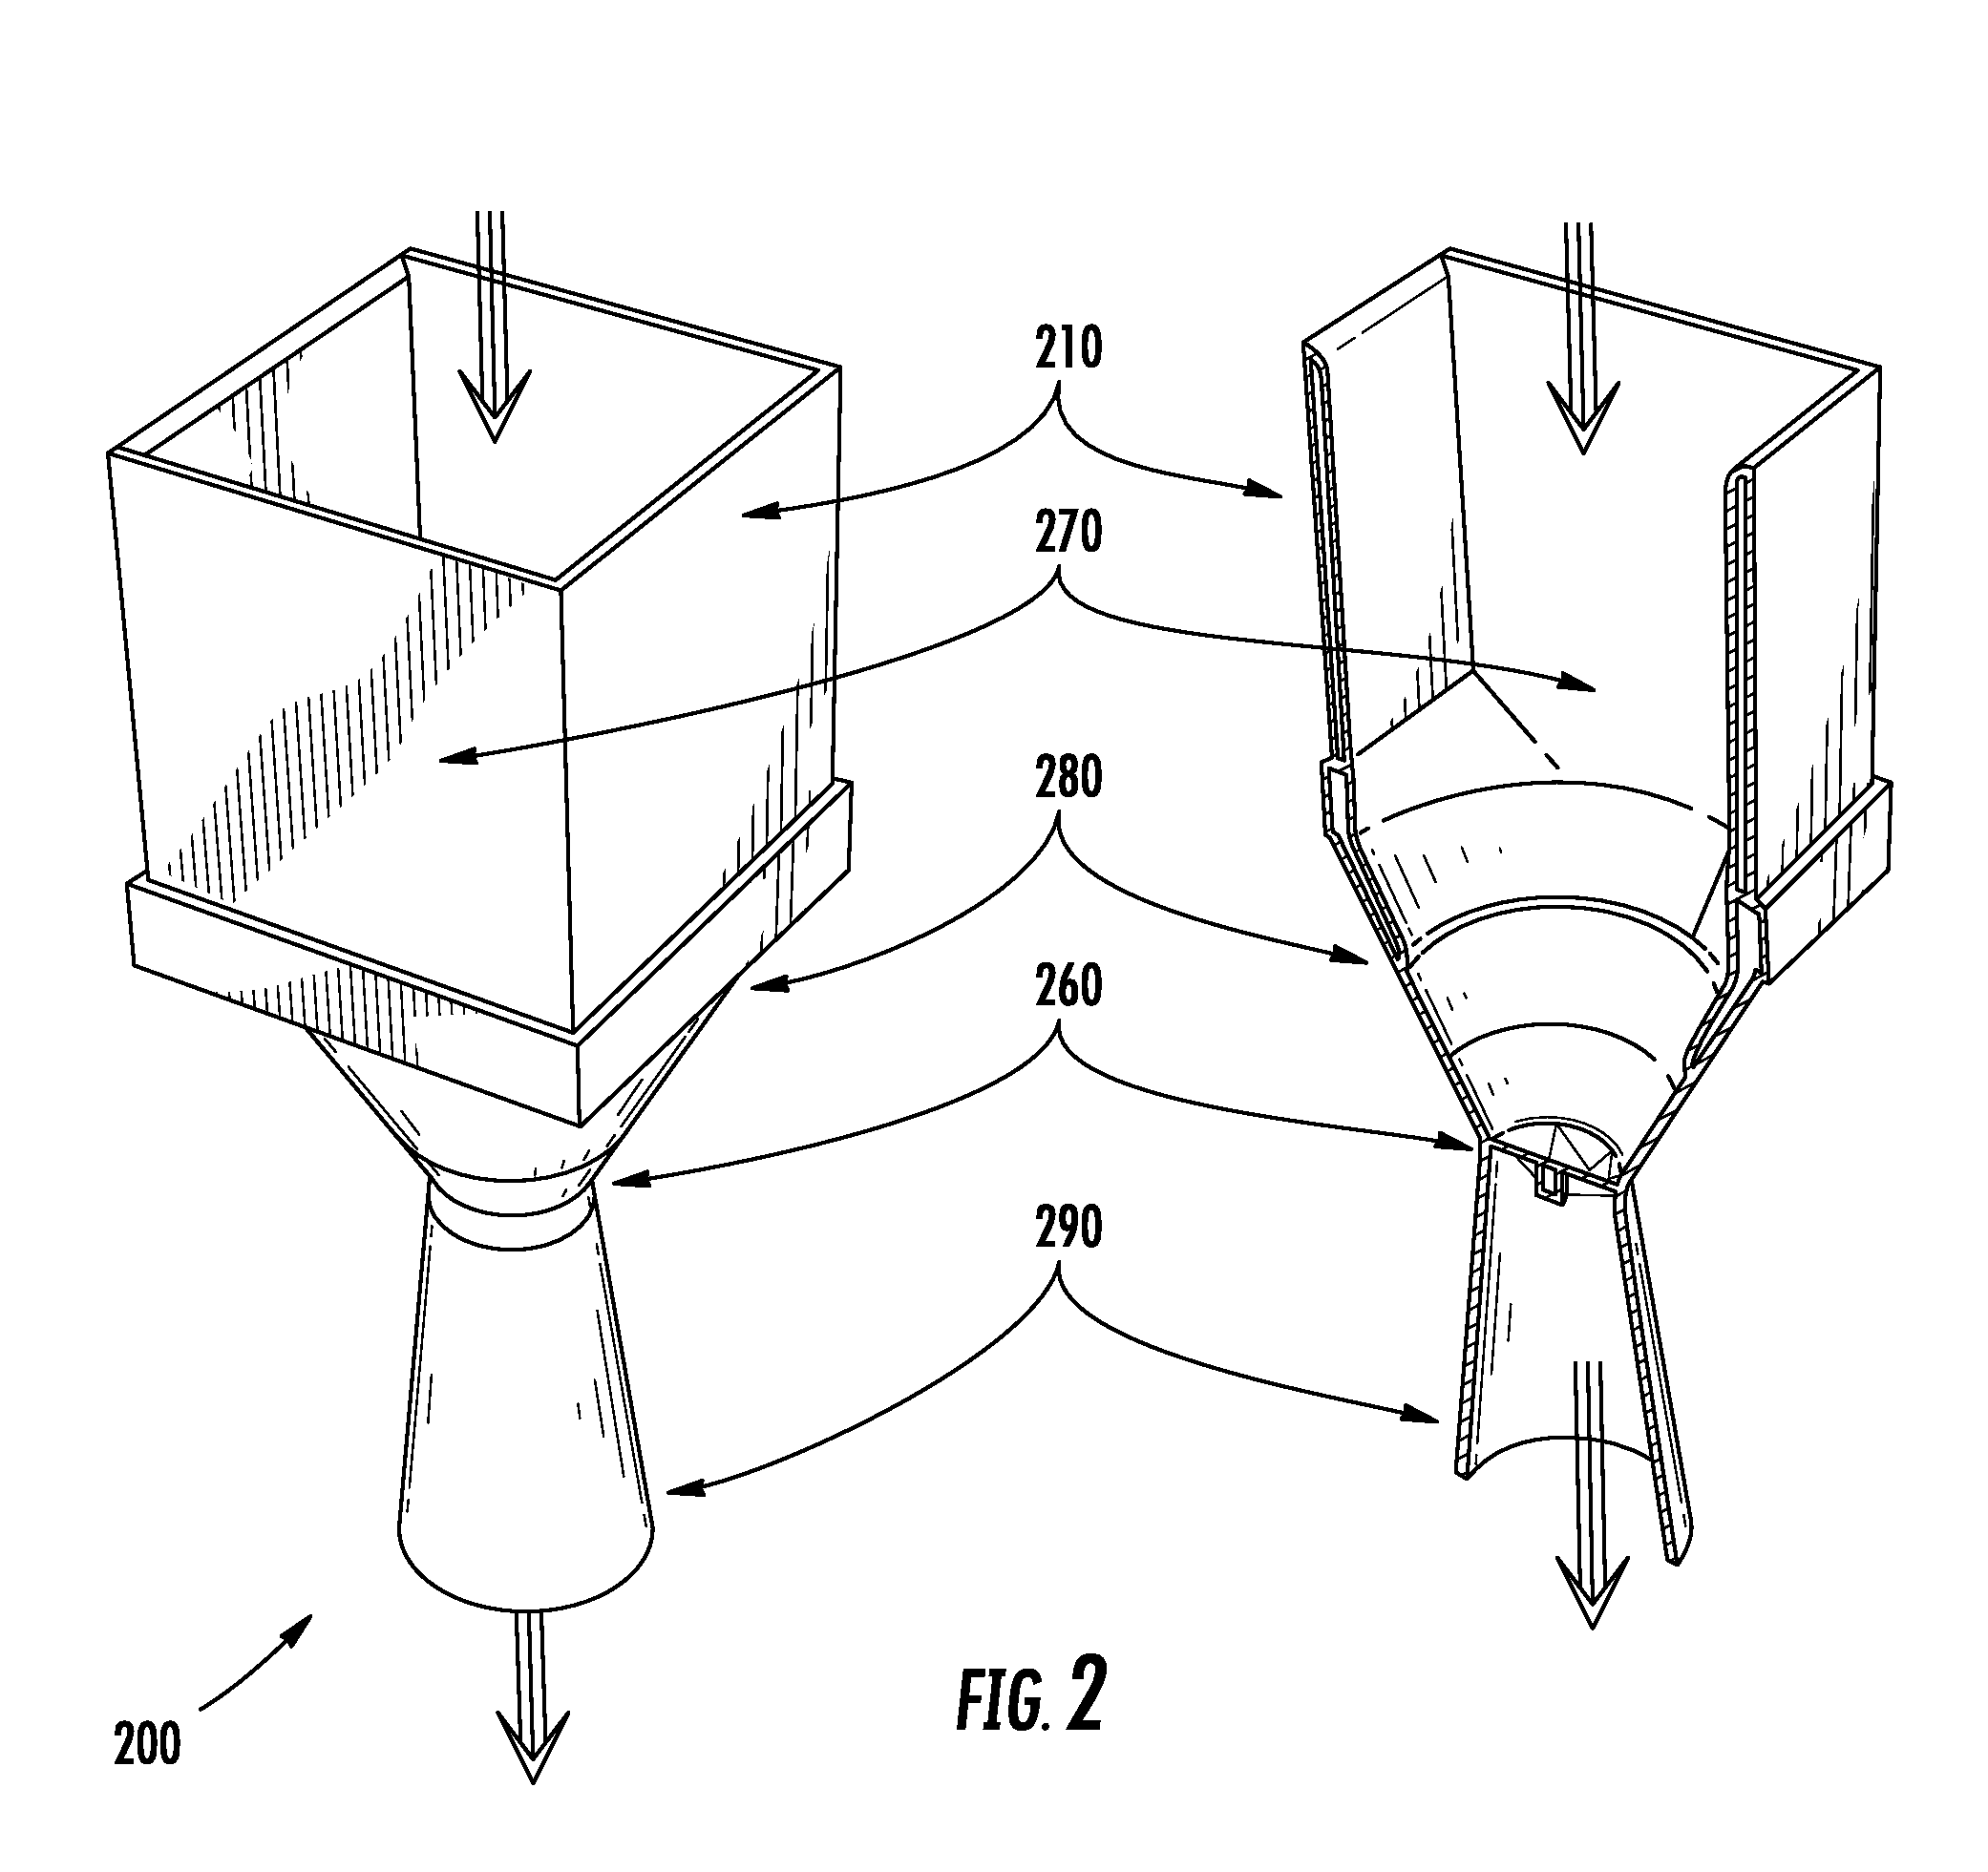 Methods, Systems, and Devices for Energy Generation